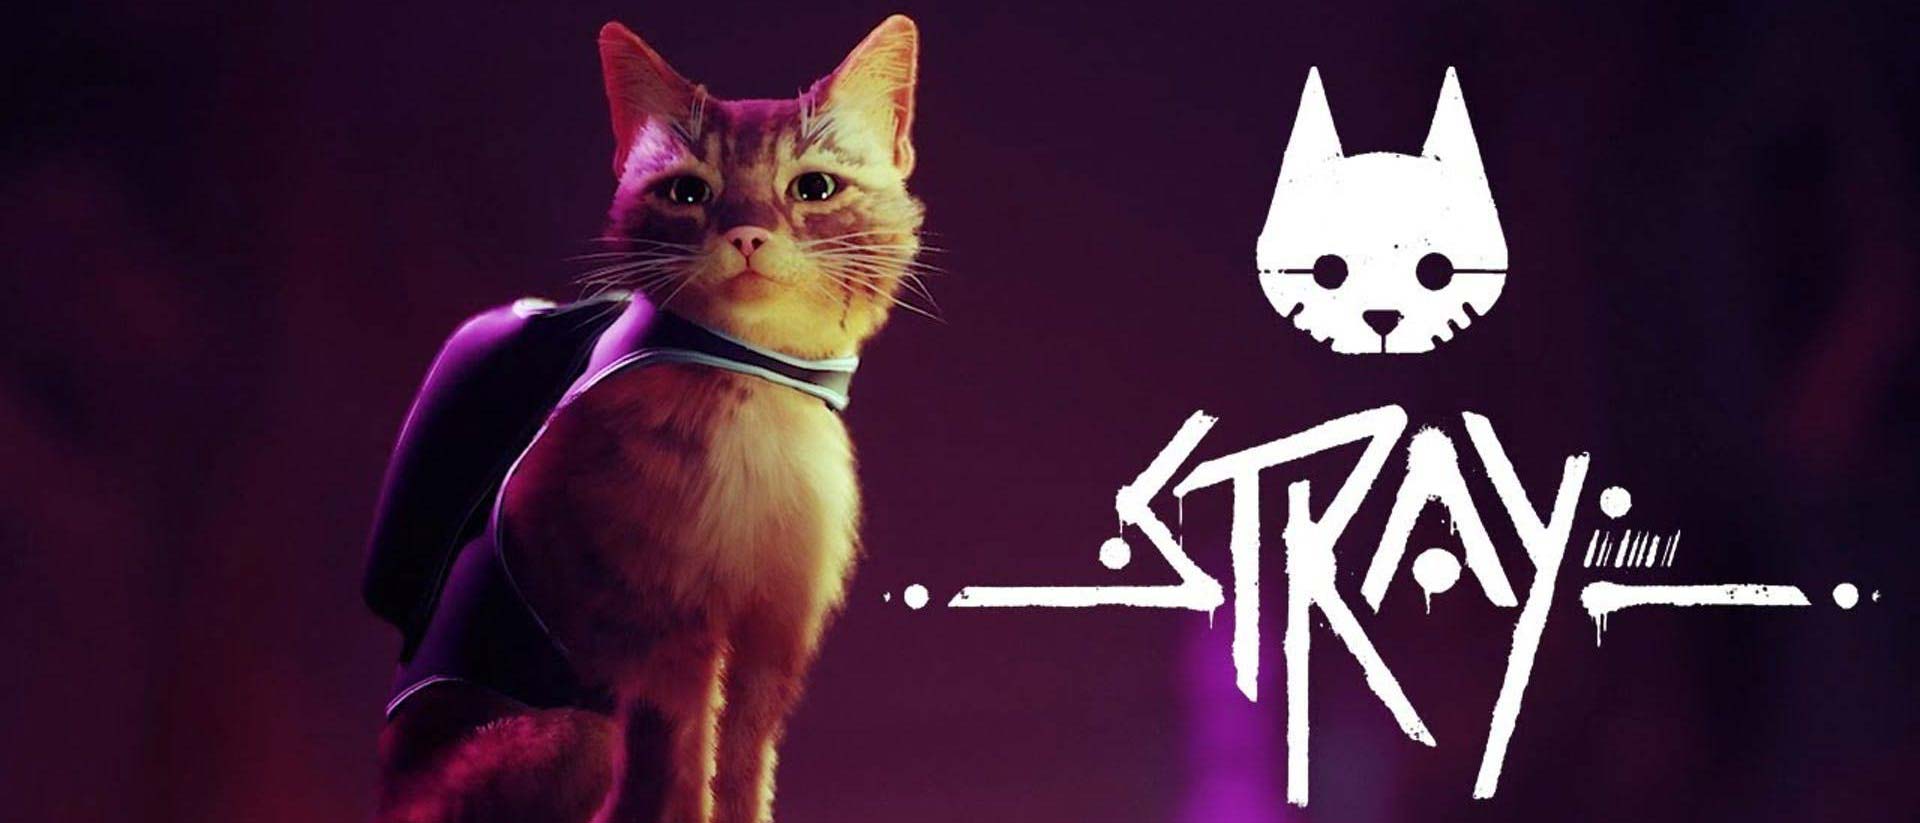 Inside the new PS5 video game Stray that everyone's talking about where you  get to play as a CAT